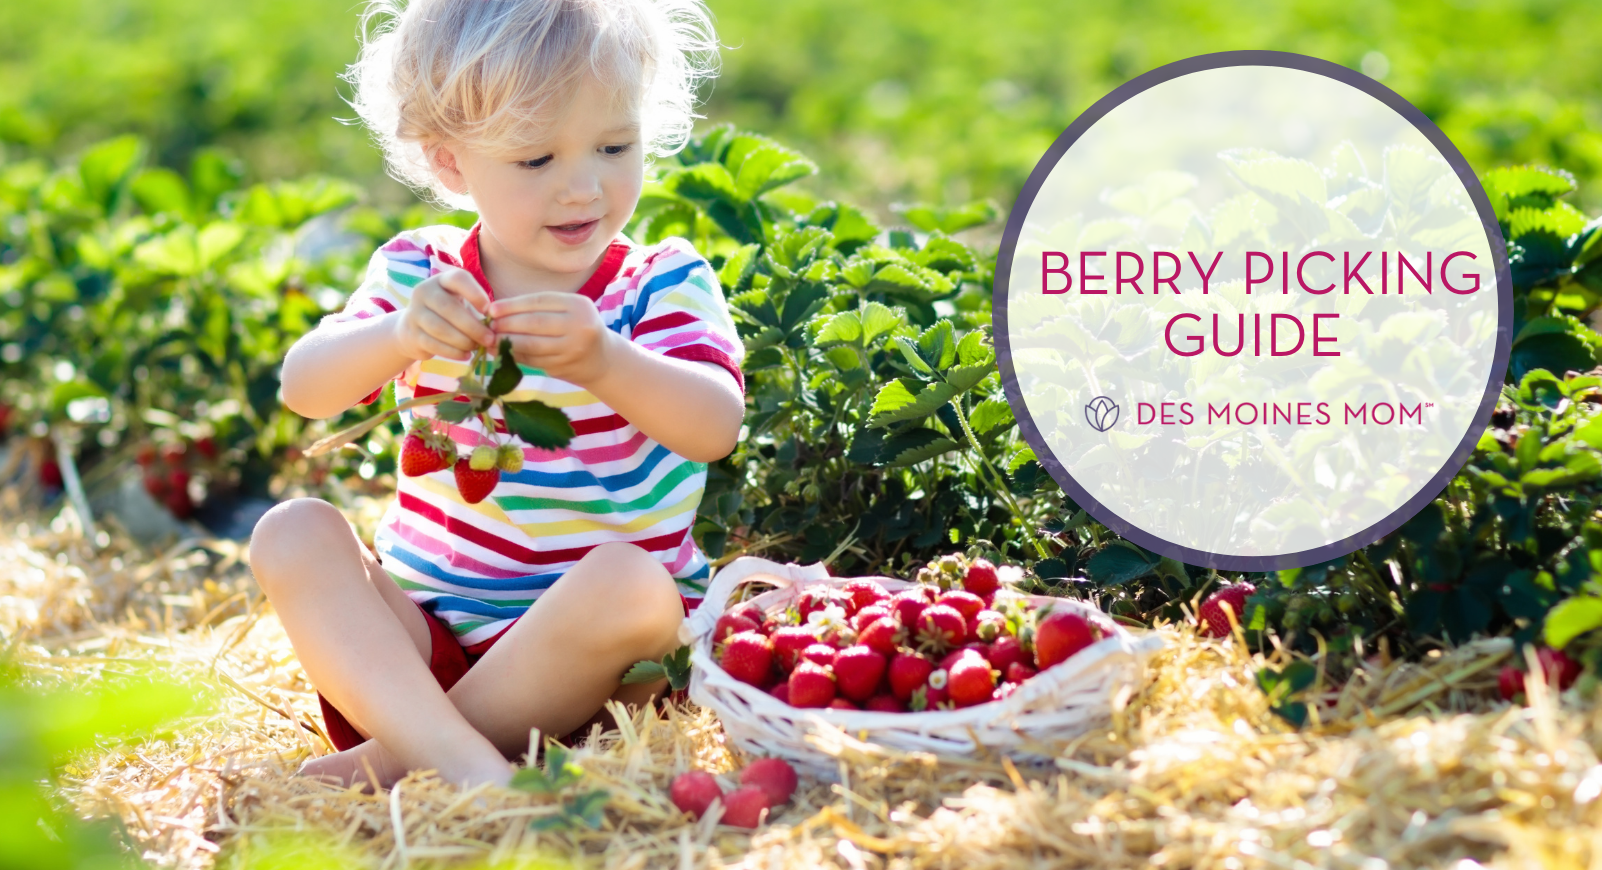 Boy sitting on ground in strawberry patch. Berry Picking des moines. Des Moines Mom